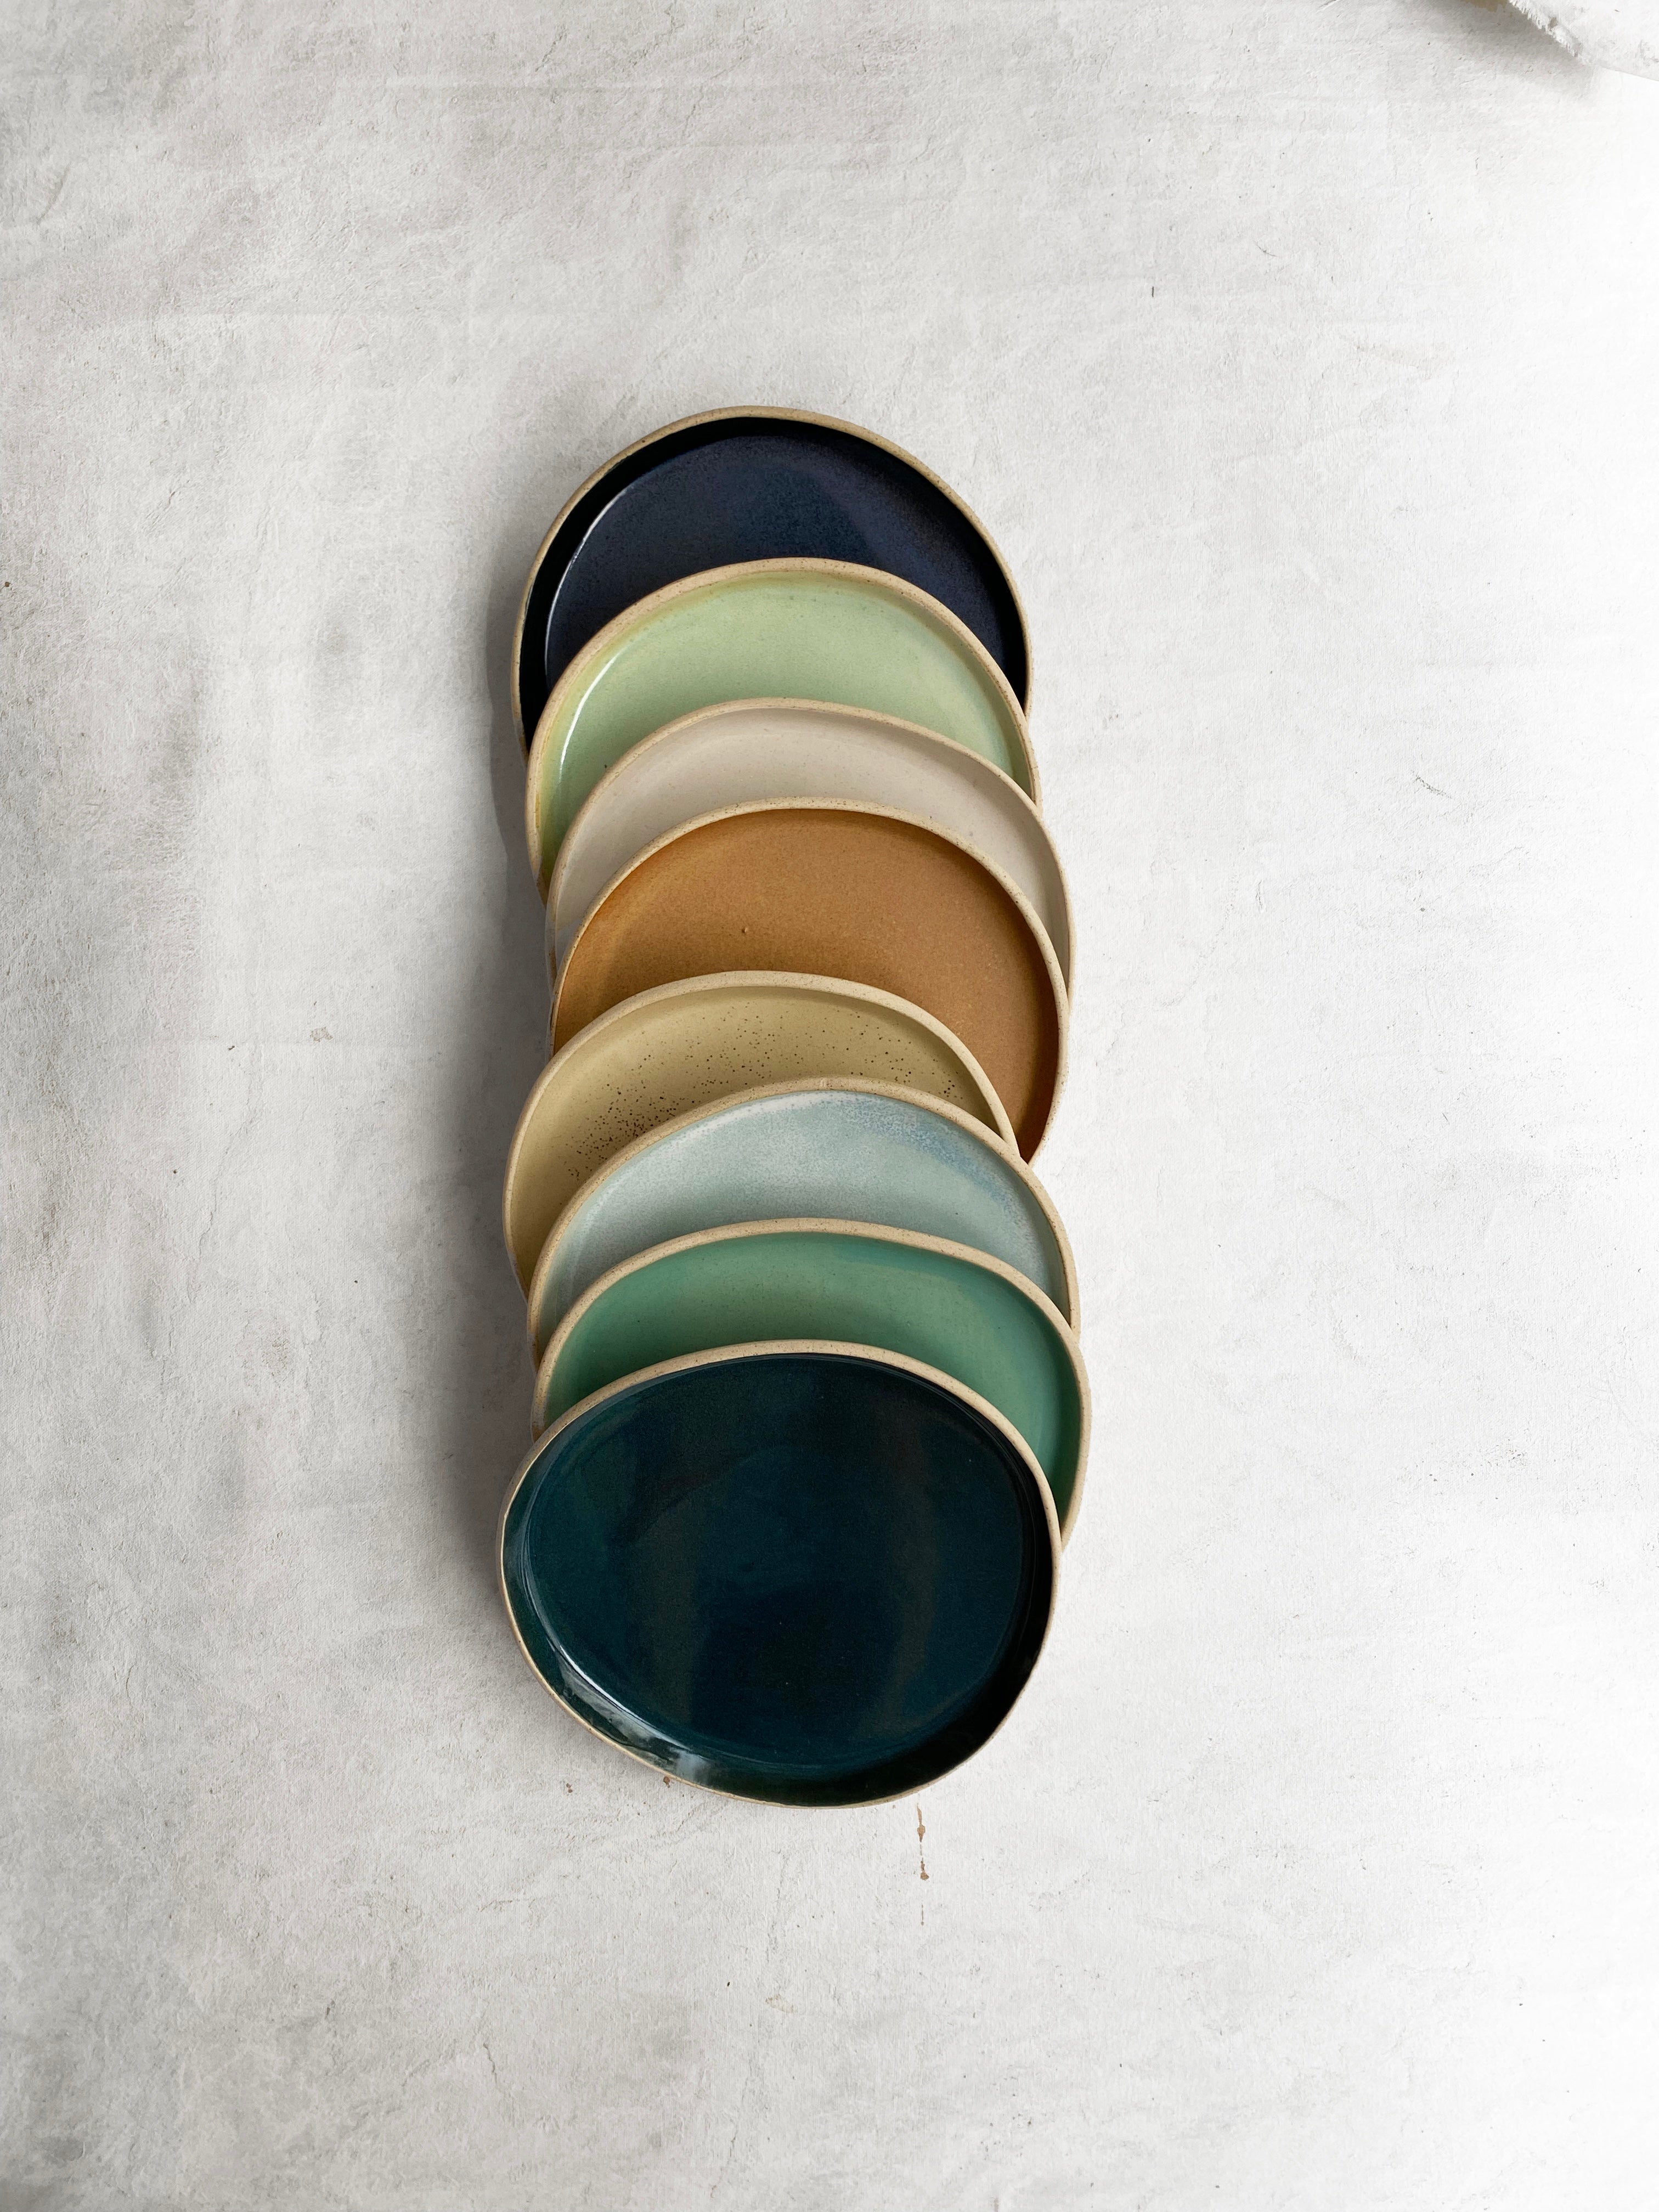 Dinner Plate in Sage Green